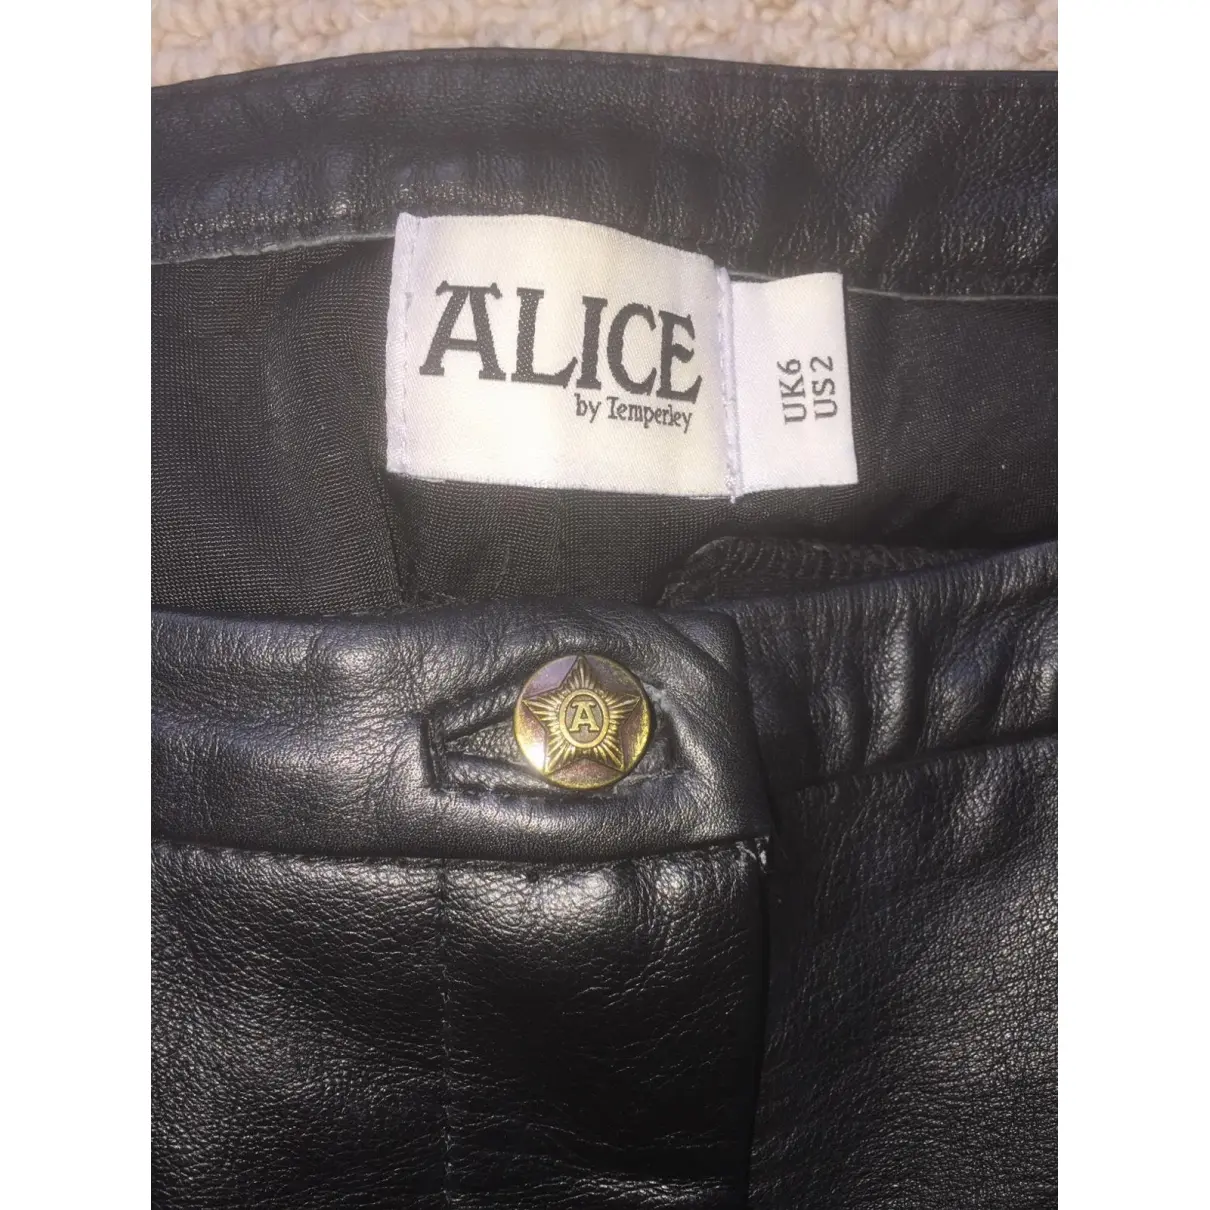 Alice by Temperley Leather slim pants for sale